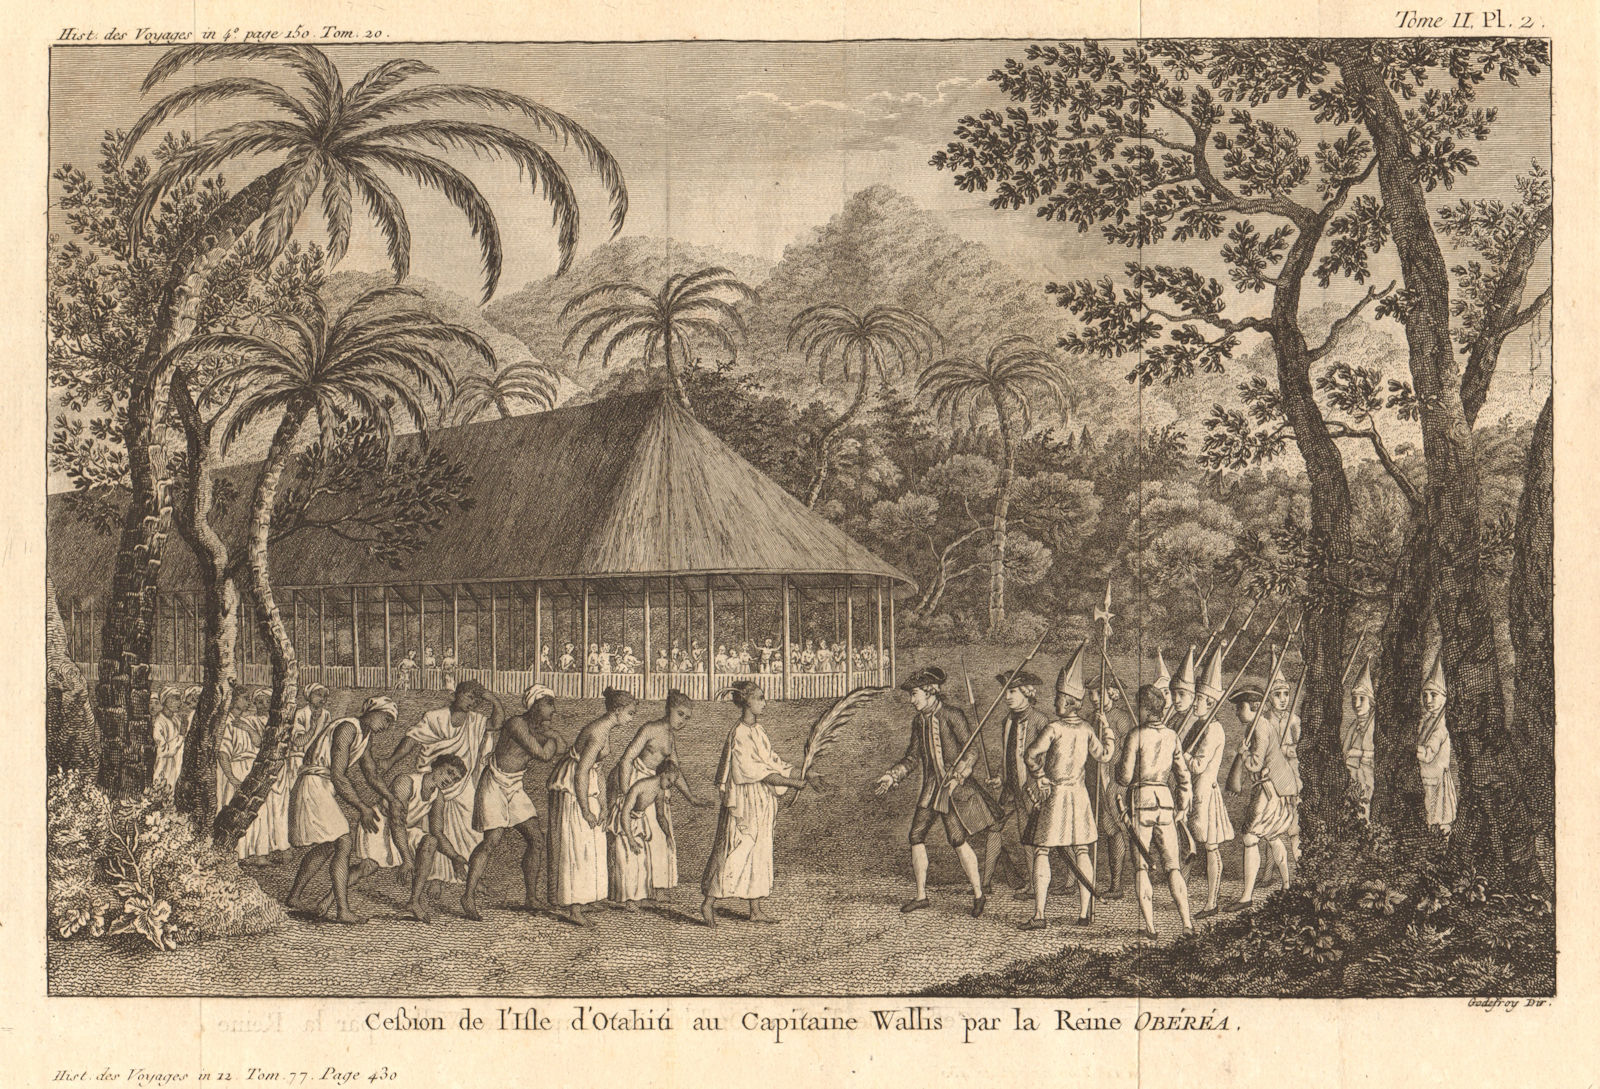 Associate Product Tahiti being ceded to Captain Wallis by Queen Obere. Otahiti. Reine Obéréa 1789